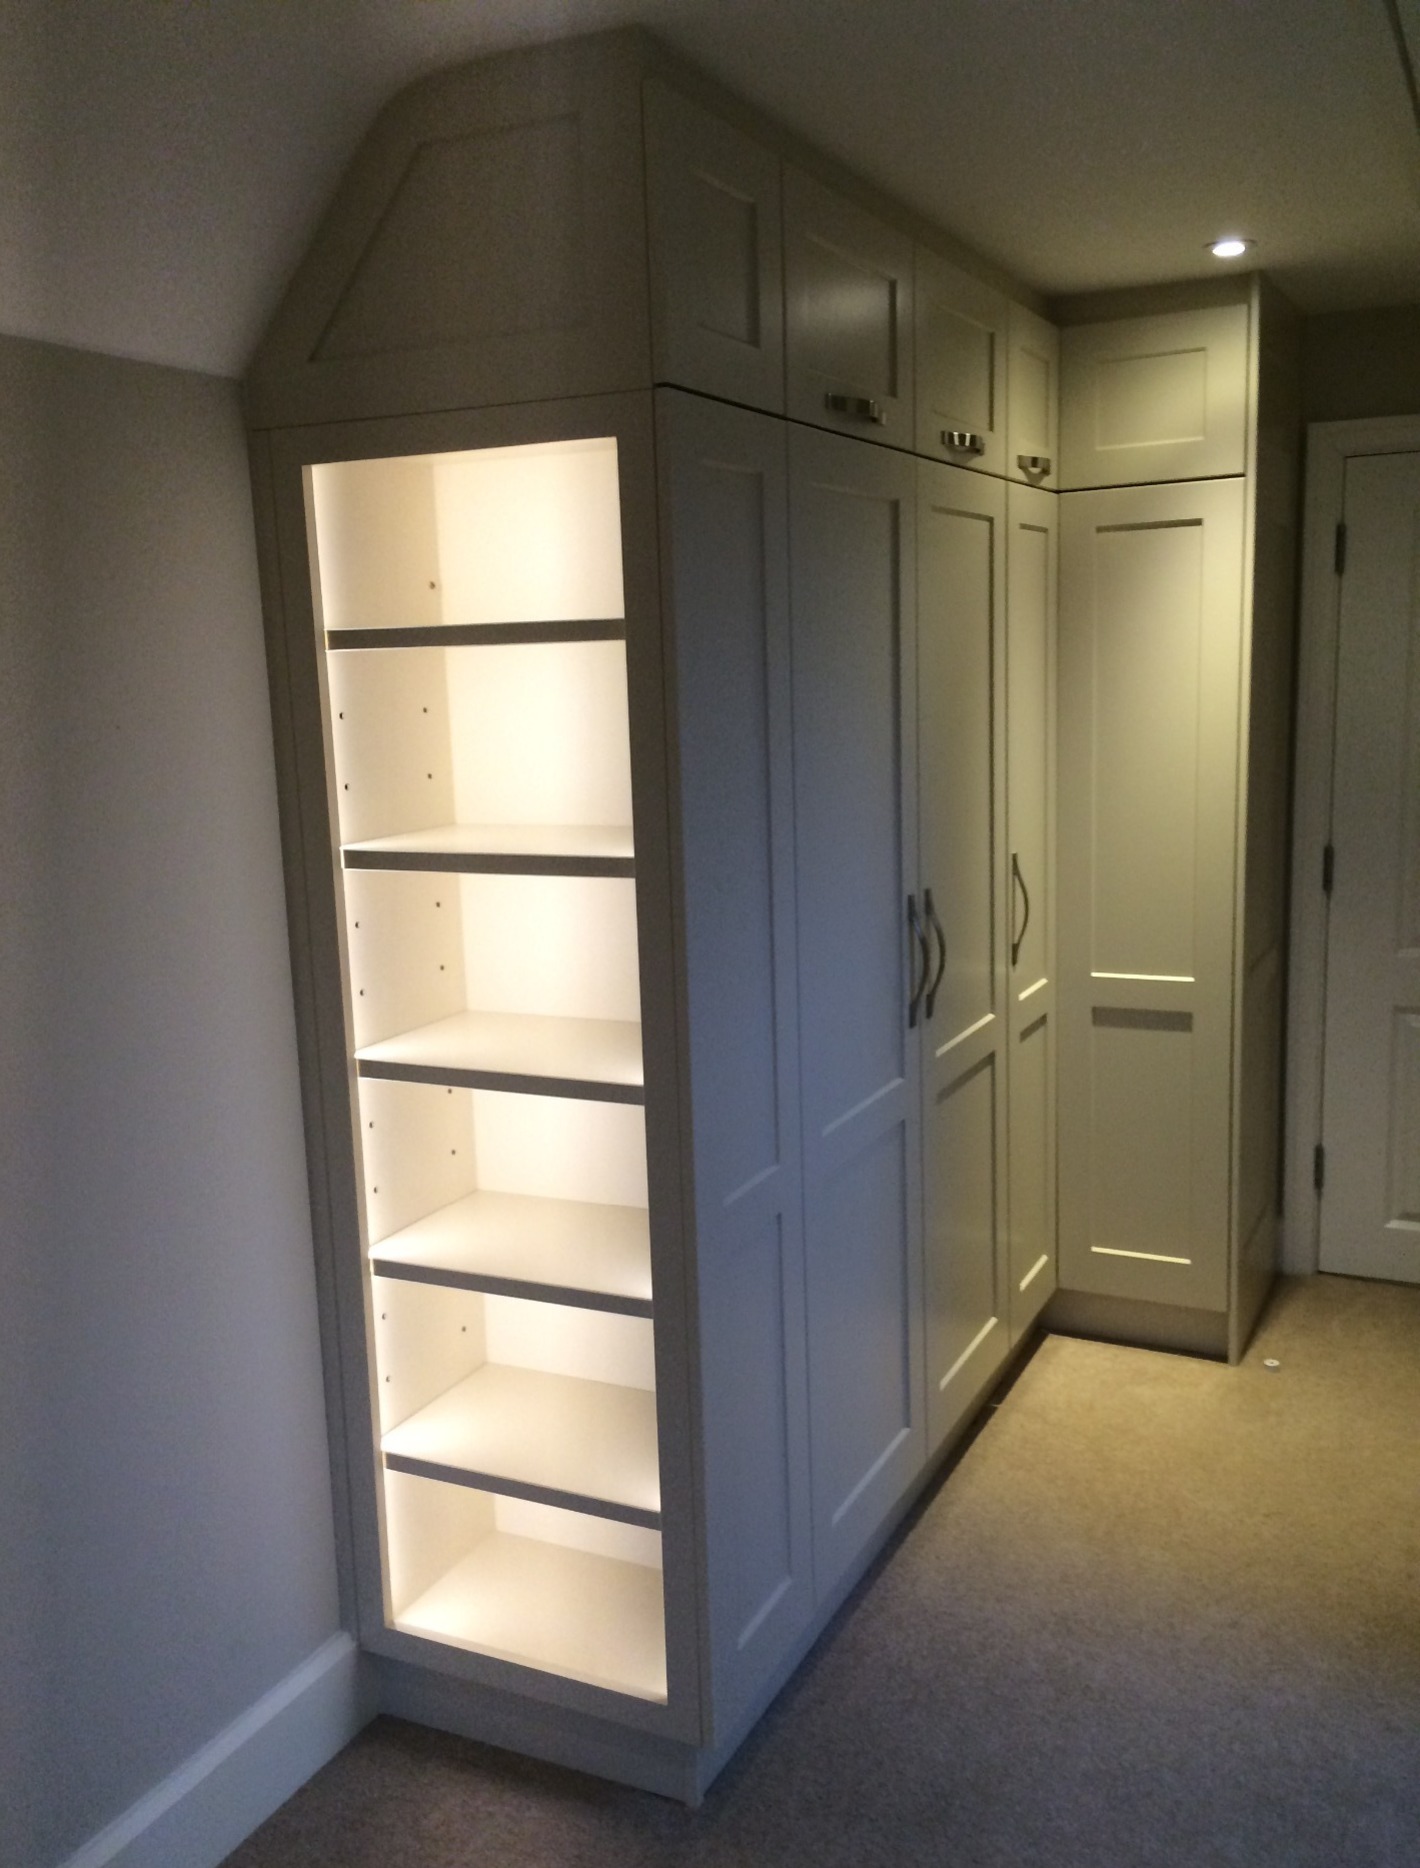 Hand-made storage with shelves and LED lighting